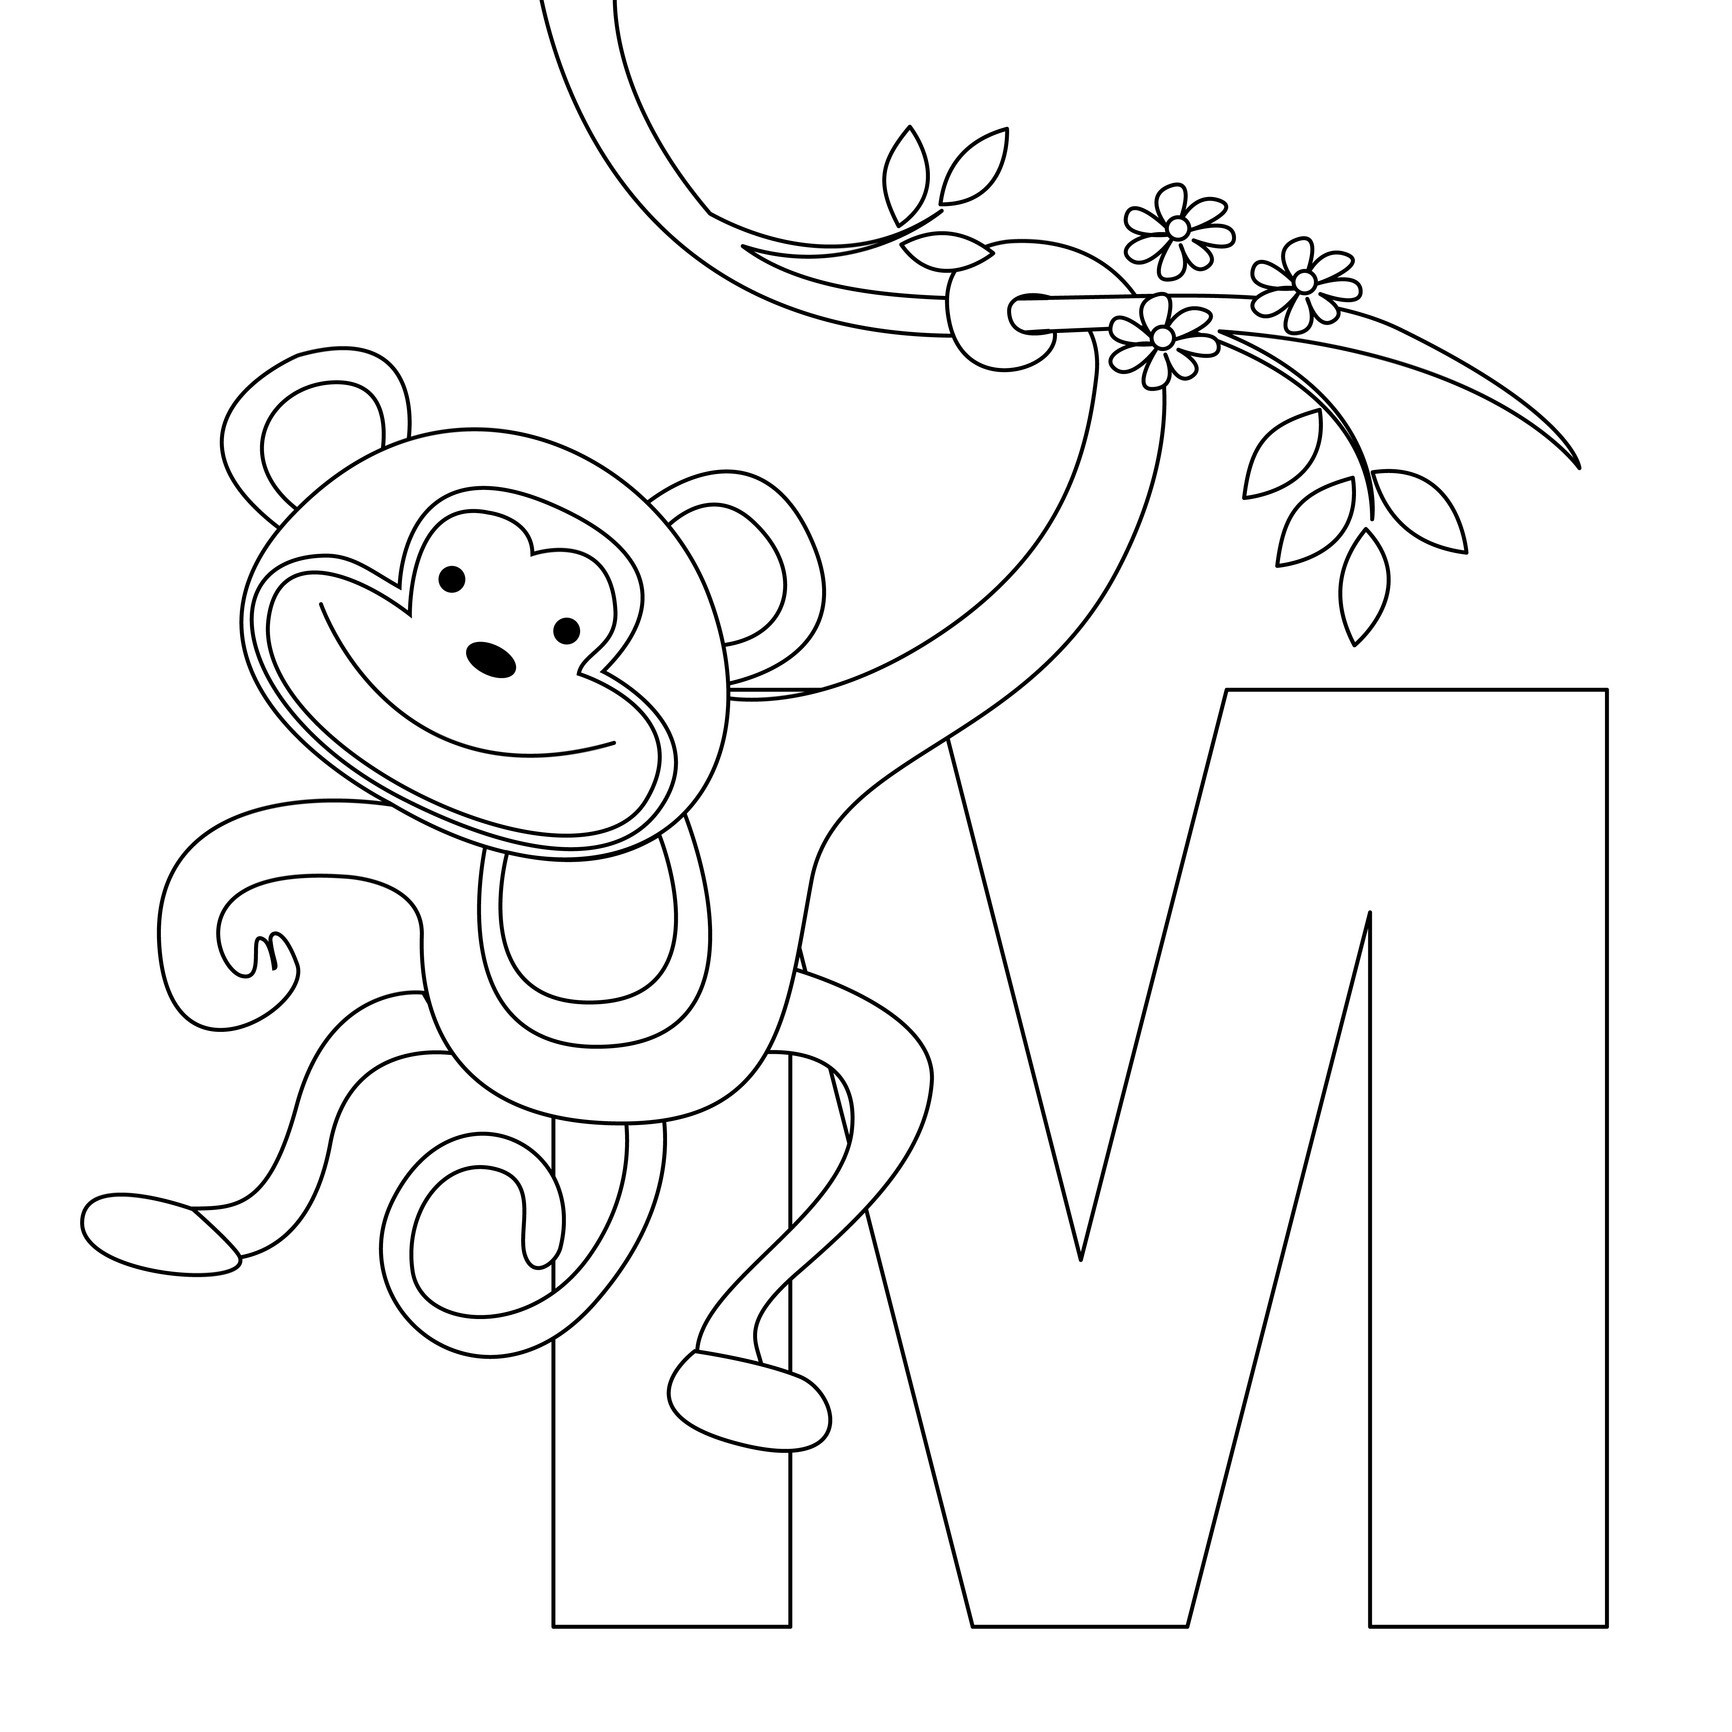 pictures of monkeys to color monkeys free to color for kids monkeys kids coloring pages monkeys pictures to color of 